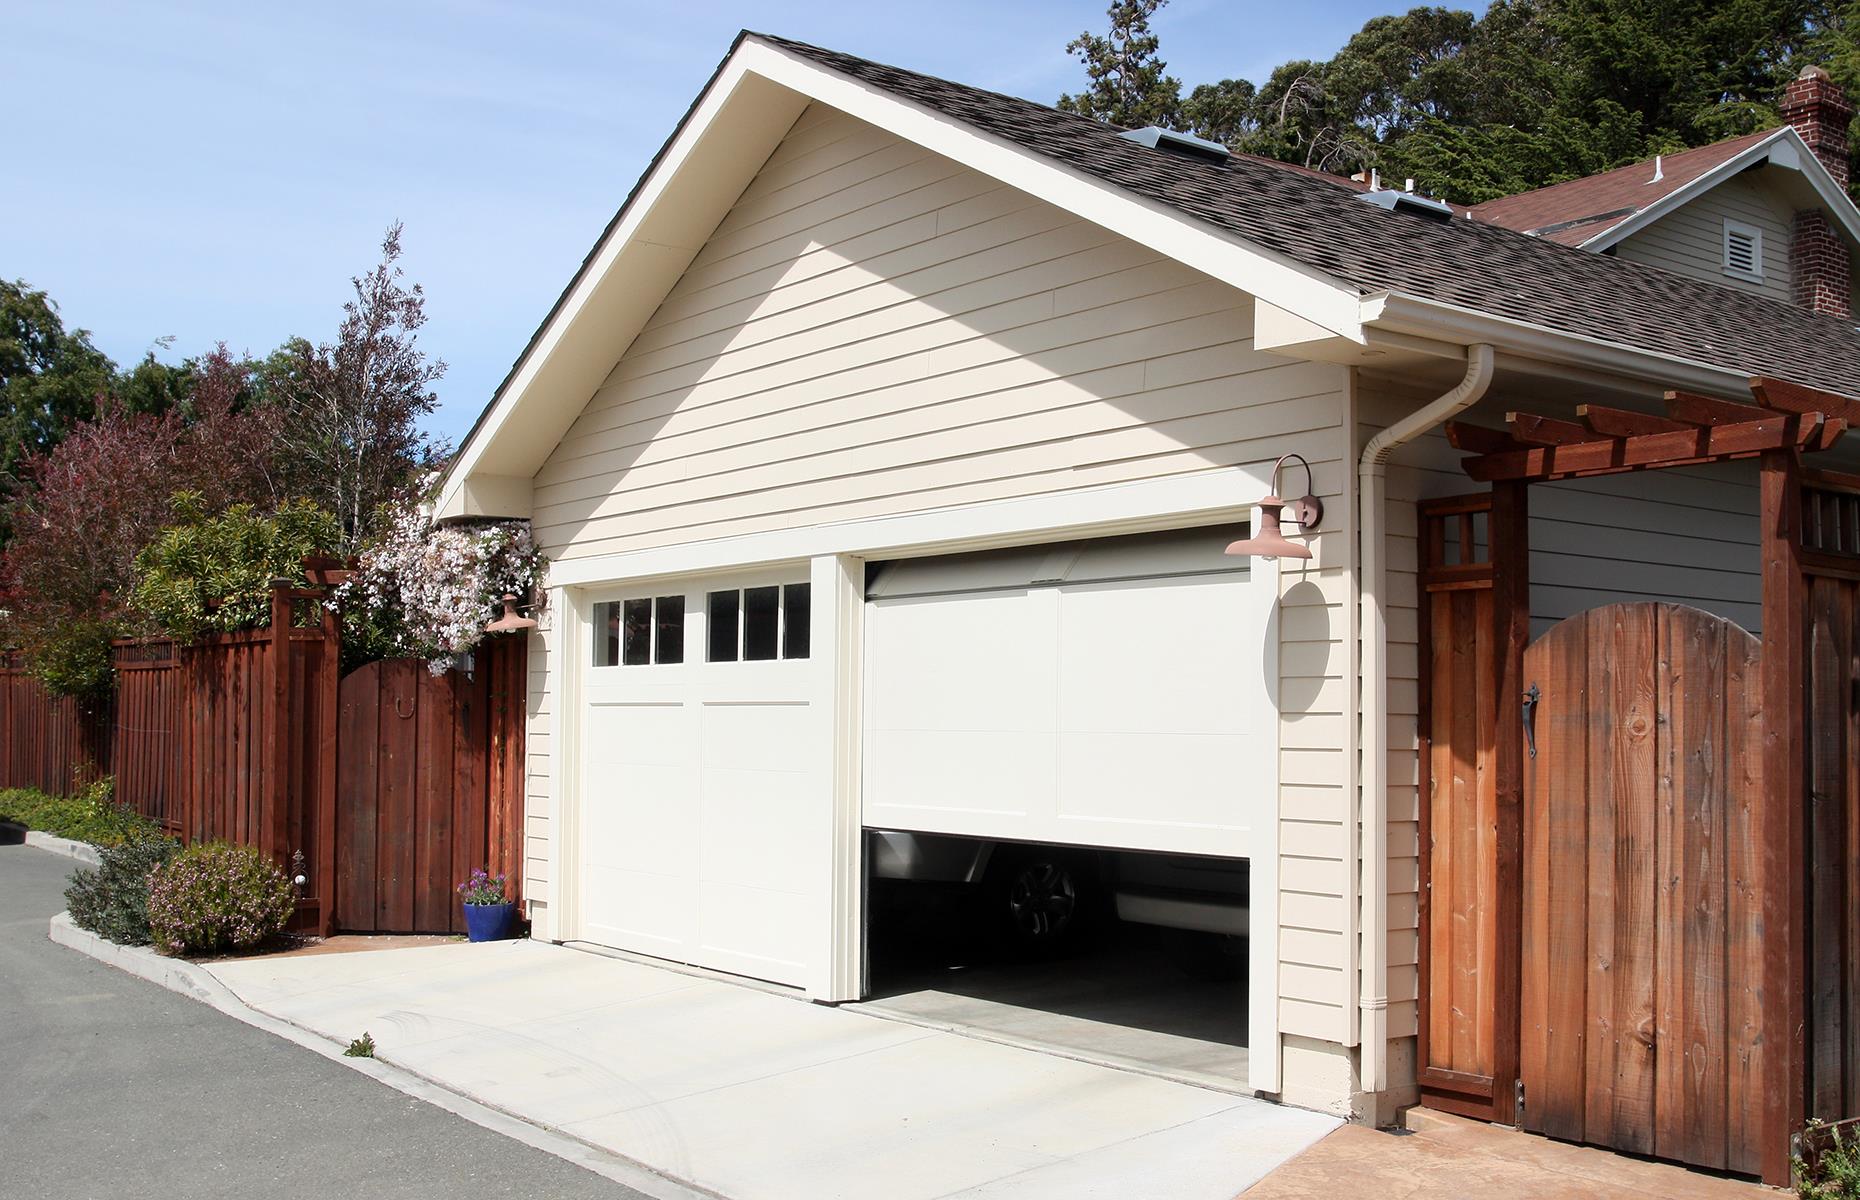 <p>Being able to park your car inside a garage, or at least on the driveway, brings not only a potential reduction in your insurance bills but also peace of mind. It also offers space to keep all those annoying essentials that houses seem to collect – kids' scooters, old bikes, mechanic's tools and so on – out of sight.</p>